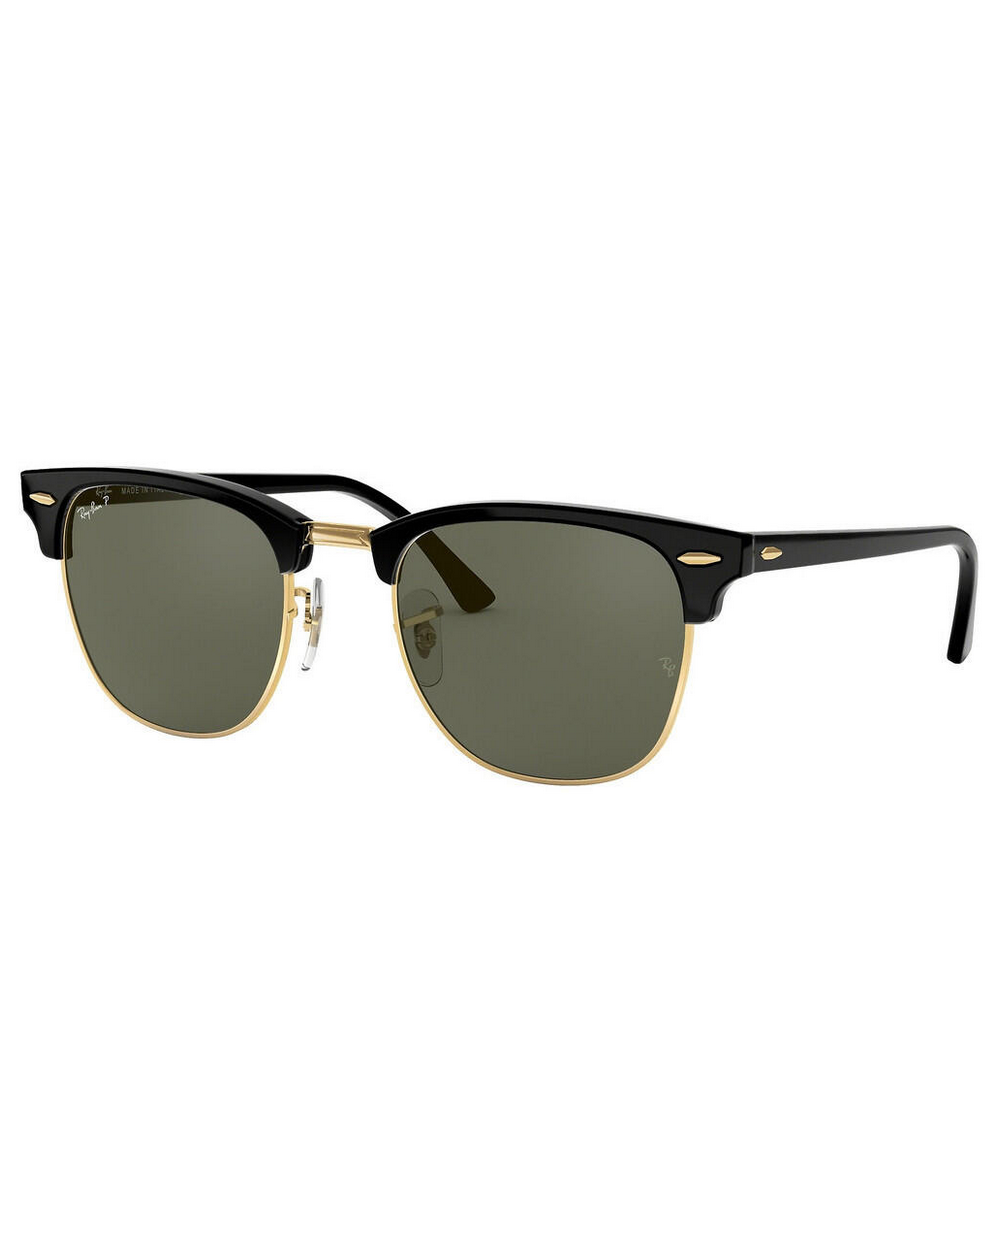 Solaires RAY-BAN pour Femme ou Homme  RB3016 901/58 CLUBMASTER - Clin  d'Oeil Cluny